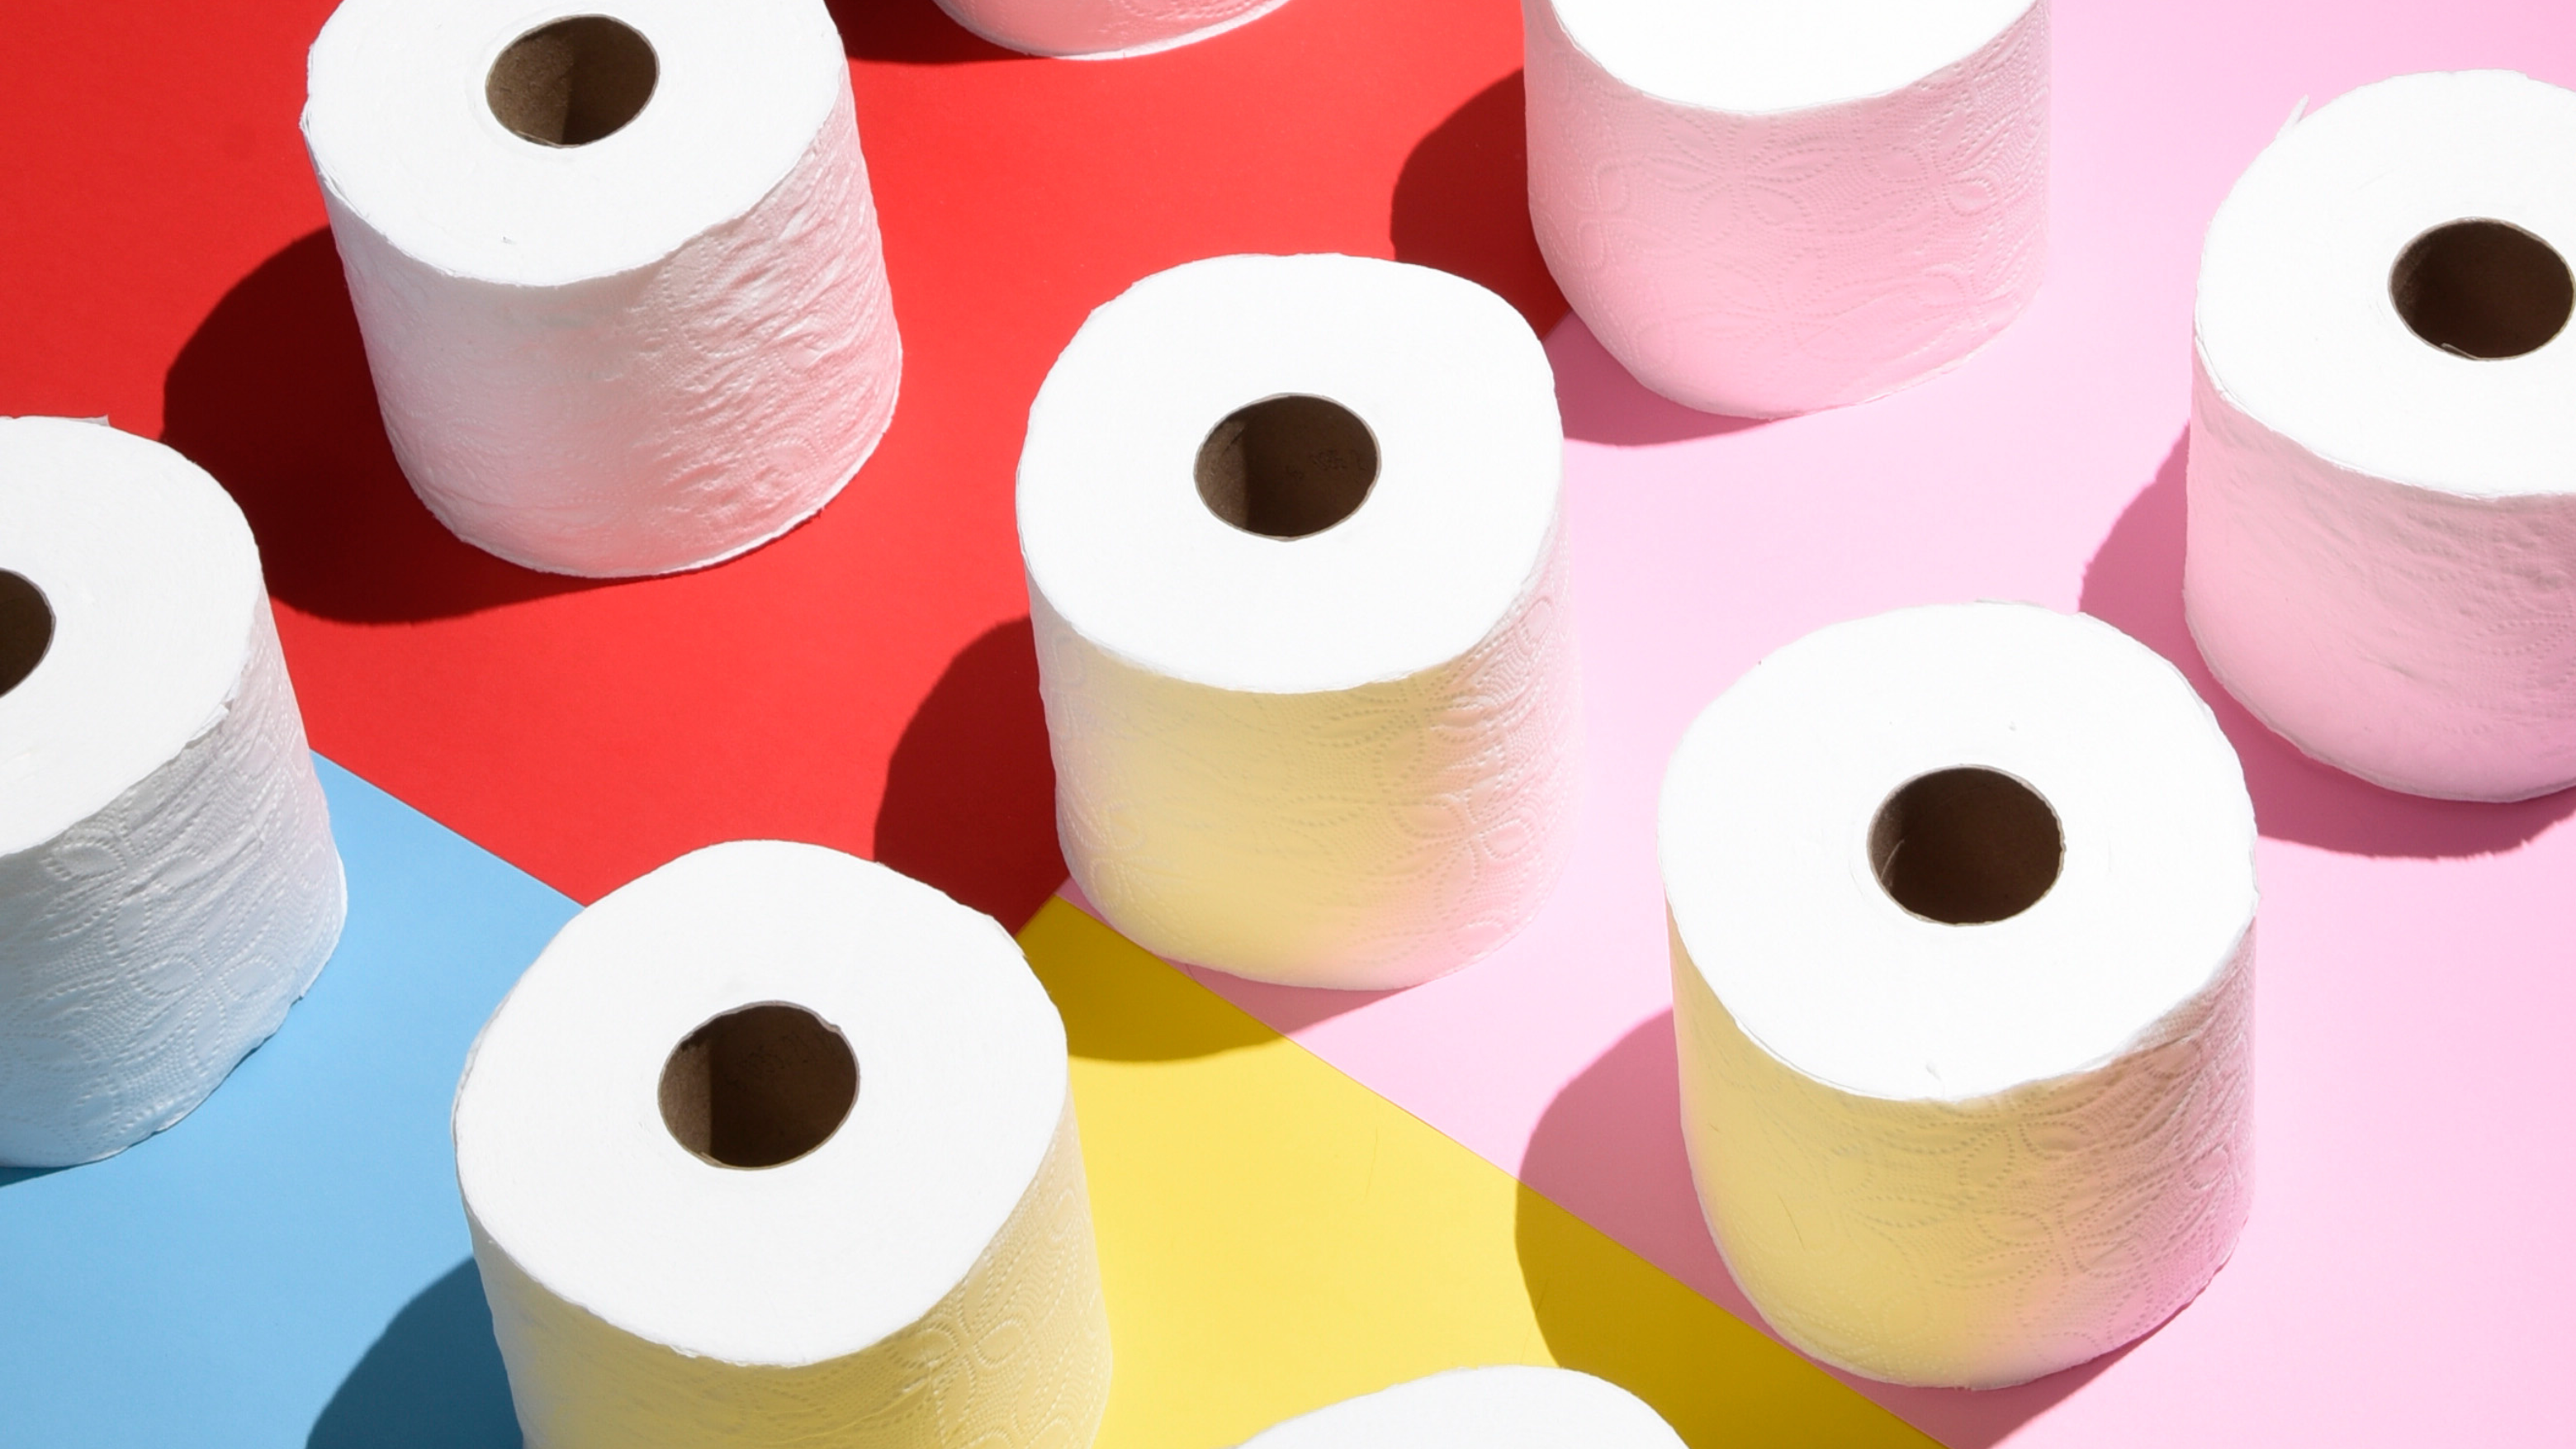 Tissue Paper - The Soaring Demand for Tissue Paper